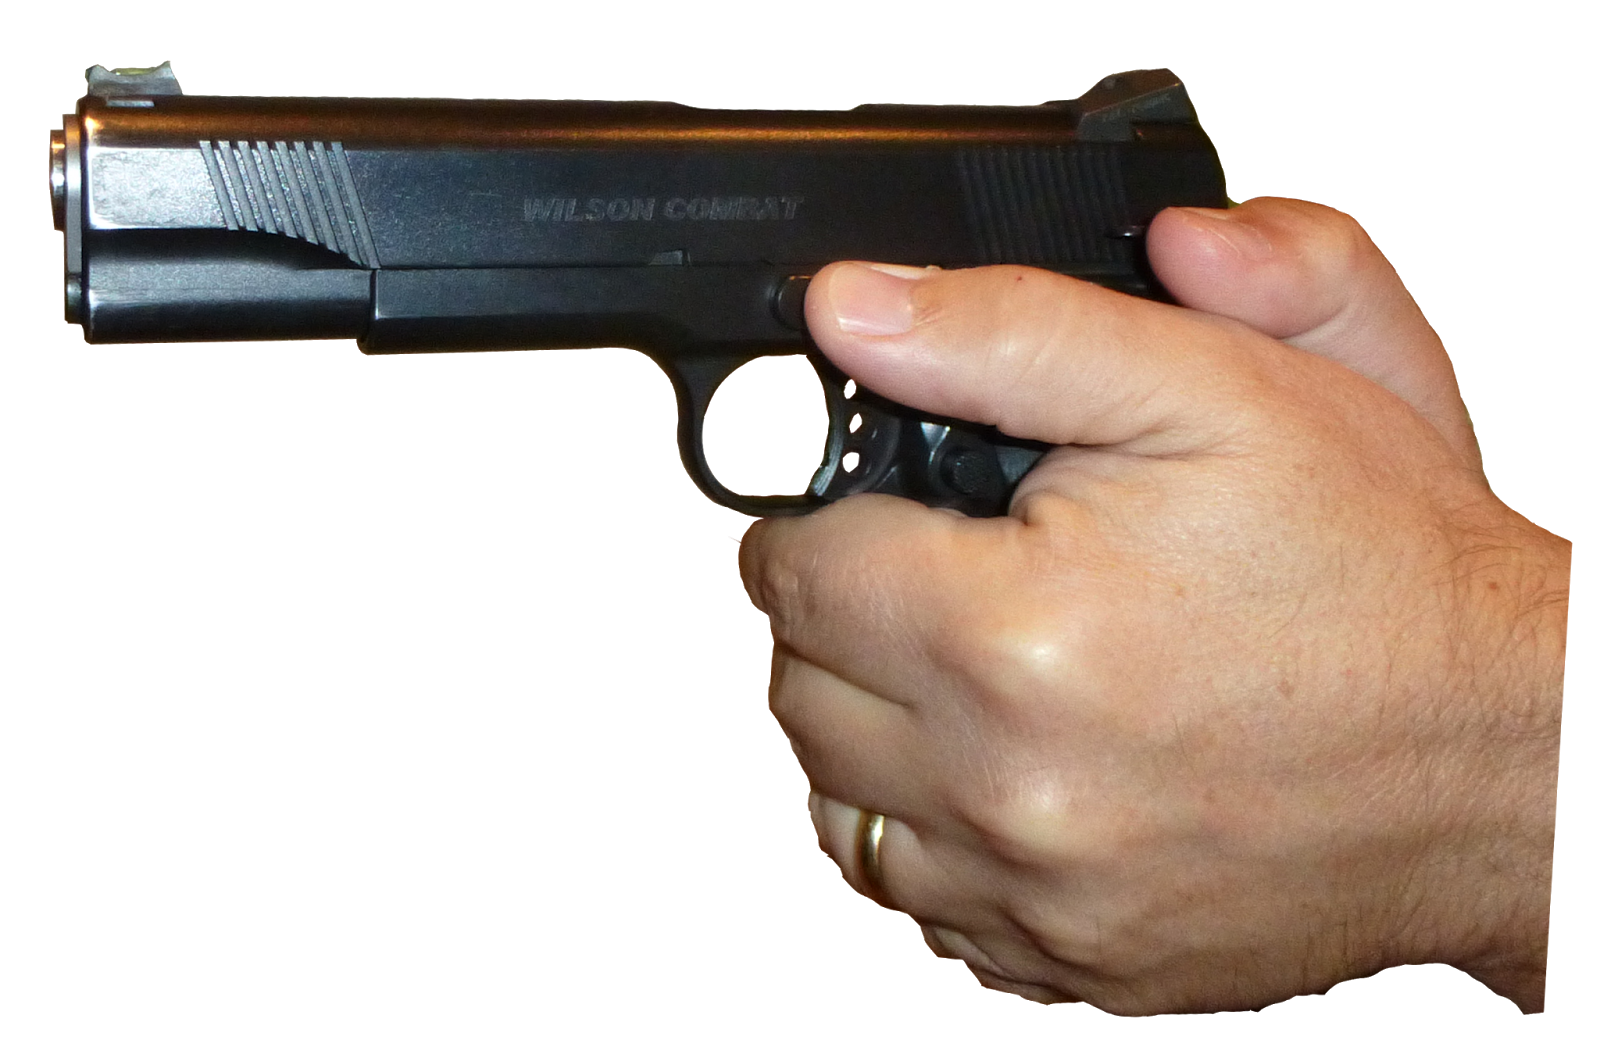 Gun Pic PNG Transparent Background, Free Download #40762 - FreeIconsPNG.